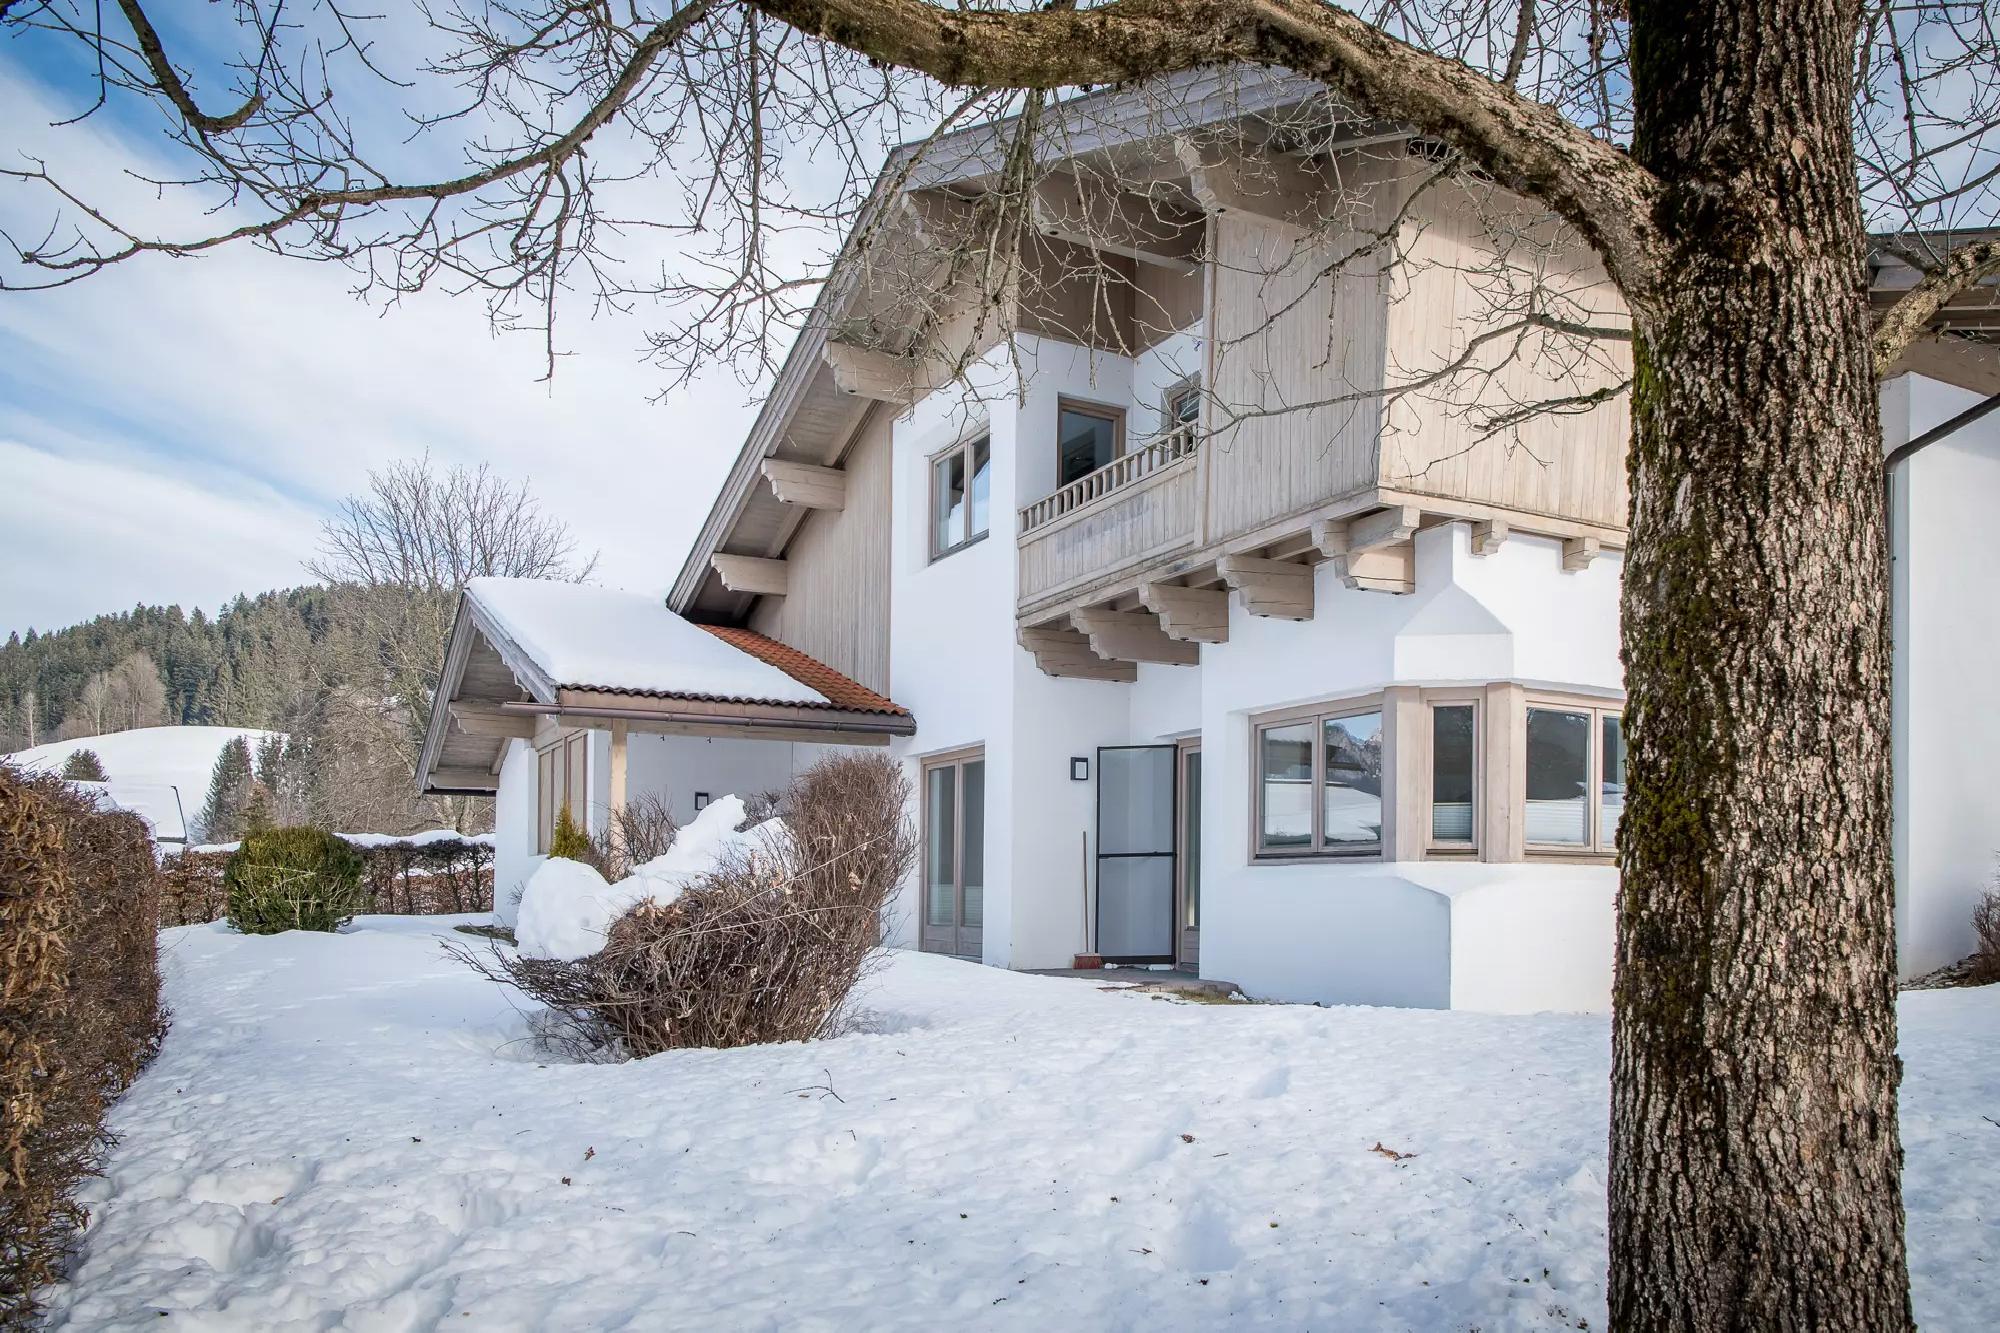 Plot with a family house in a fantastic location For Sale - St. Johann in Tirol